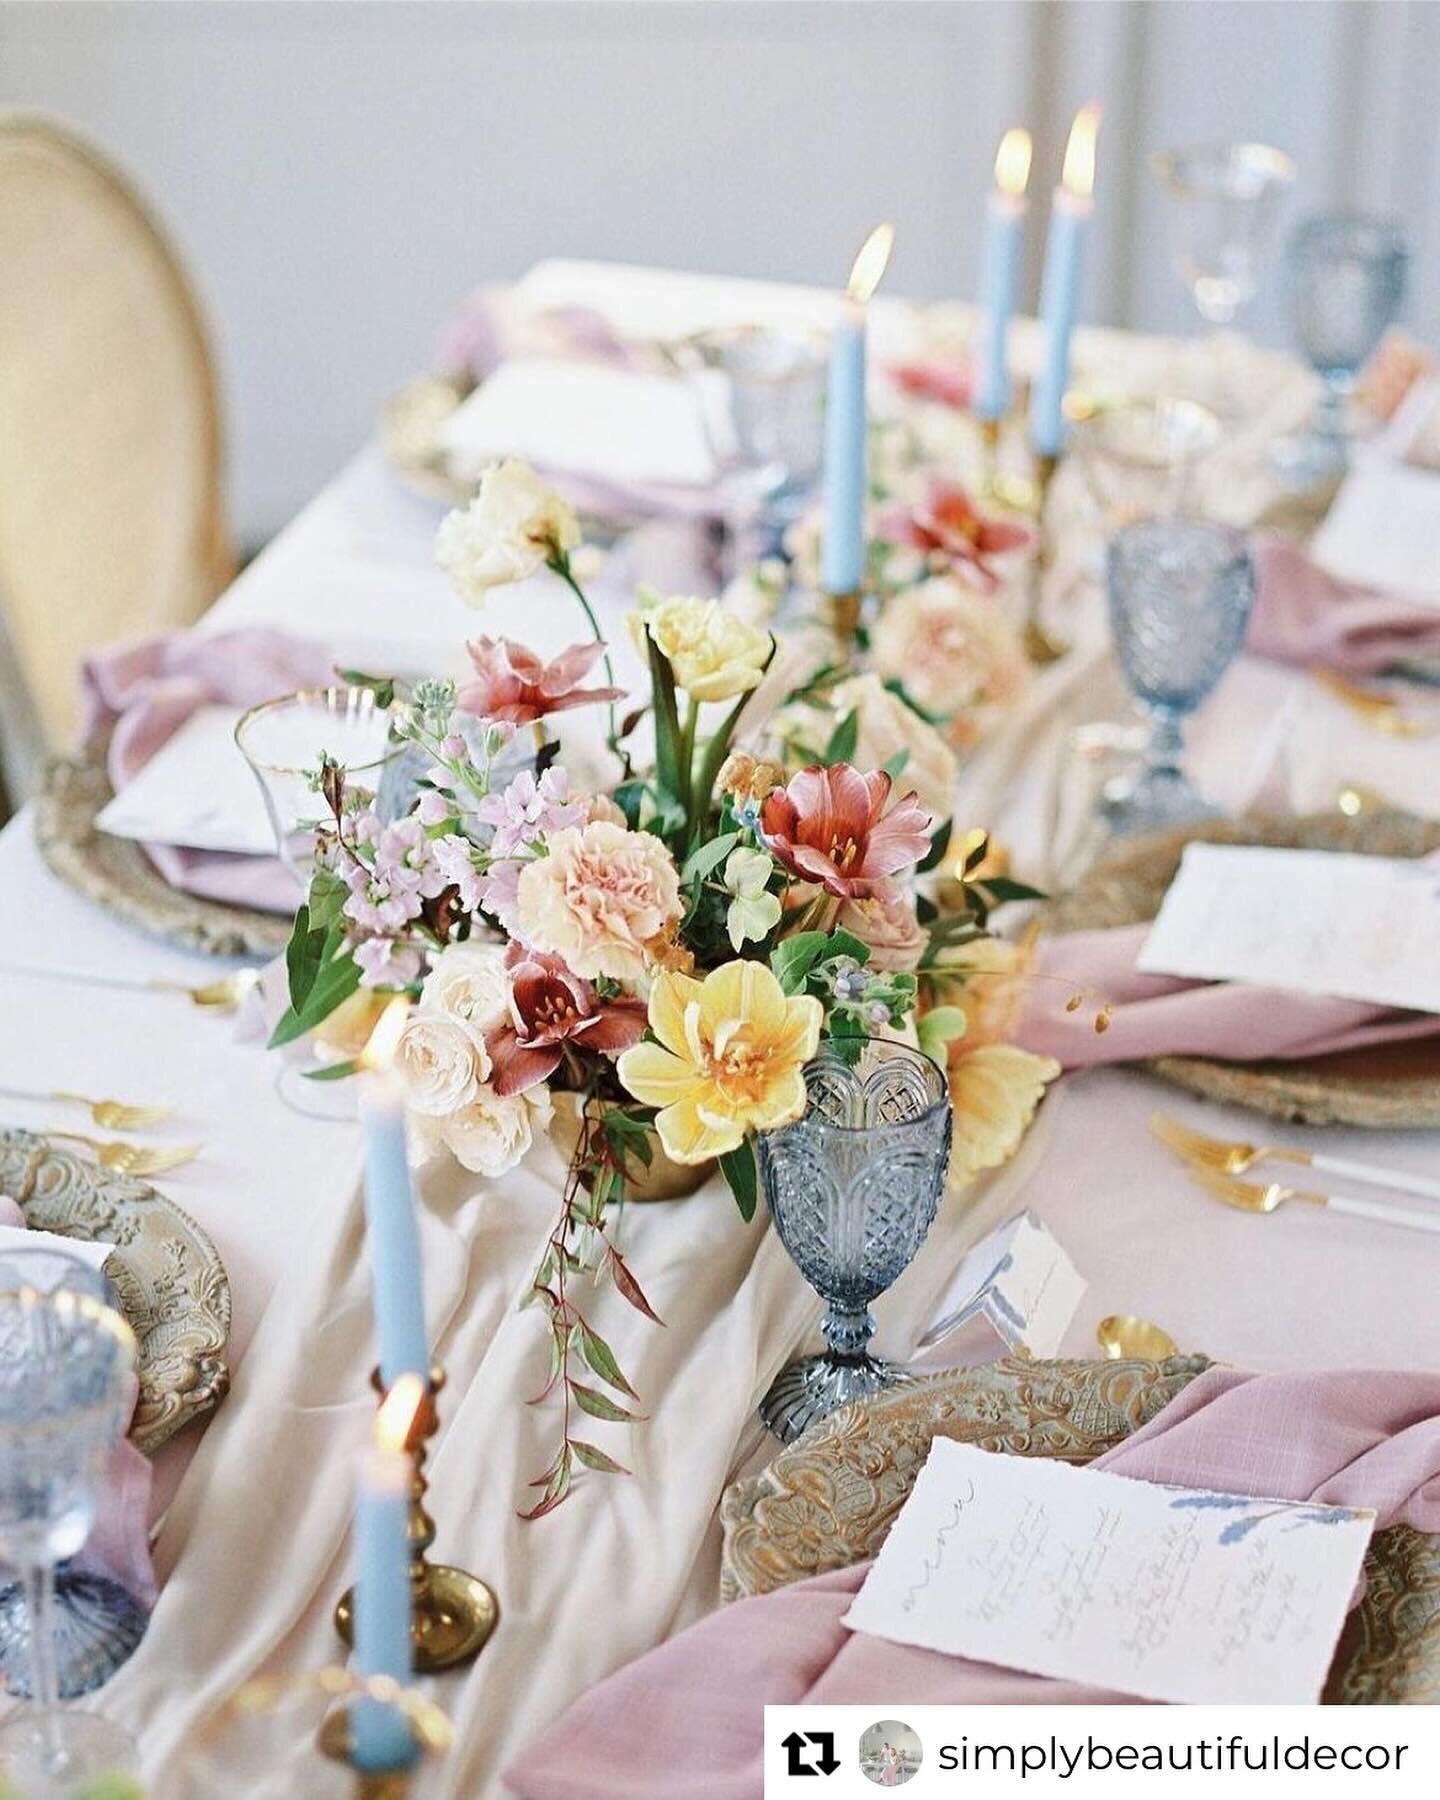 Pastel wash.

***

Repost @simplybeautifuldecor

Excited for another feature!! ✨This gorgeous pastel styled shoot at @estatesofsunnybrook is featured on @stylemepretty along with this team: 
&bull; photographer: @whitneyheard
&bull; planning + design